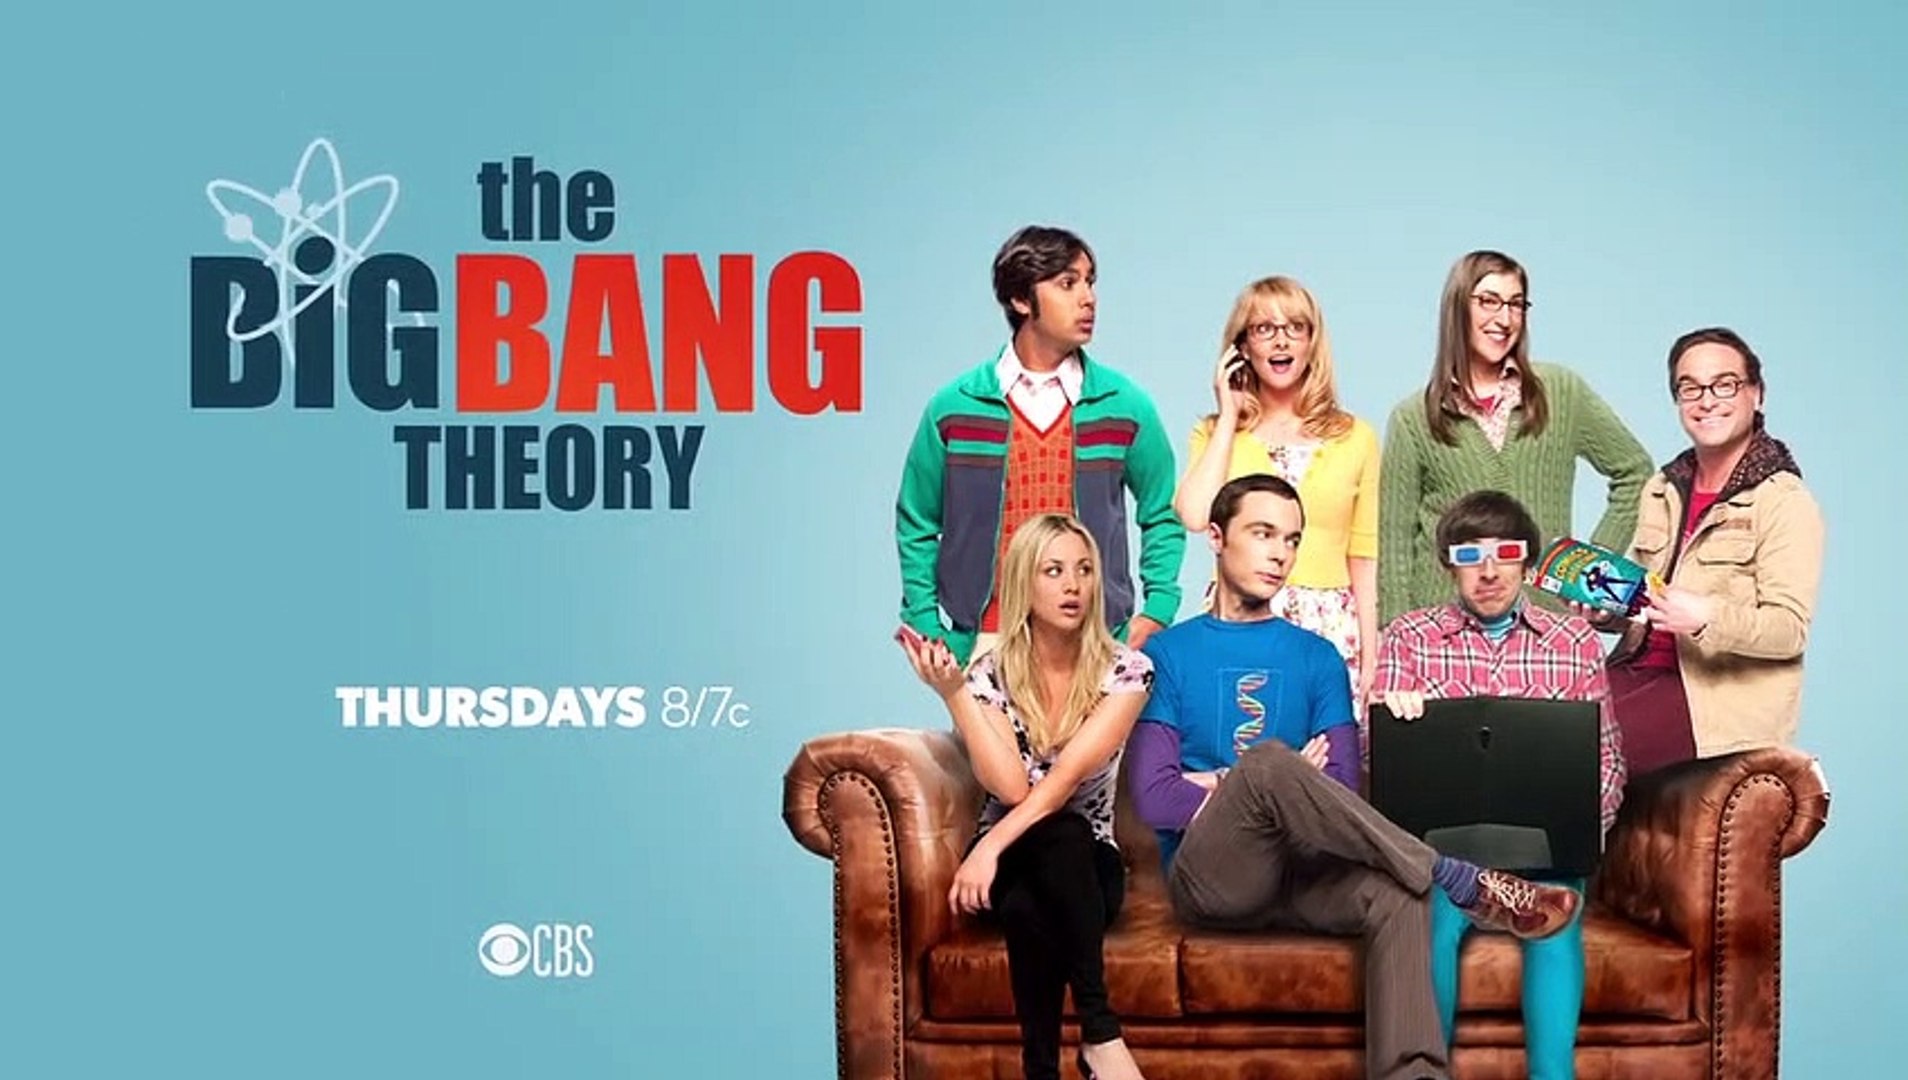 The Big Bang Theory Season 12 Ep.21 All Sneak Peeks The Plagiarism Schism  (2019) - video Dailymotion